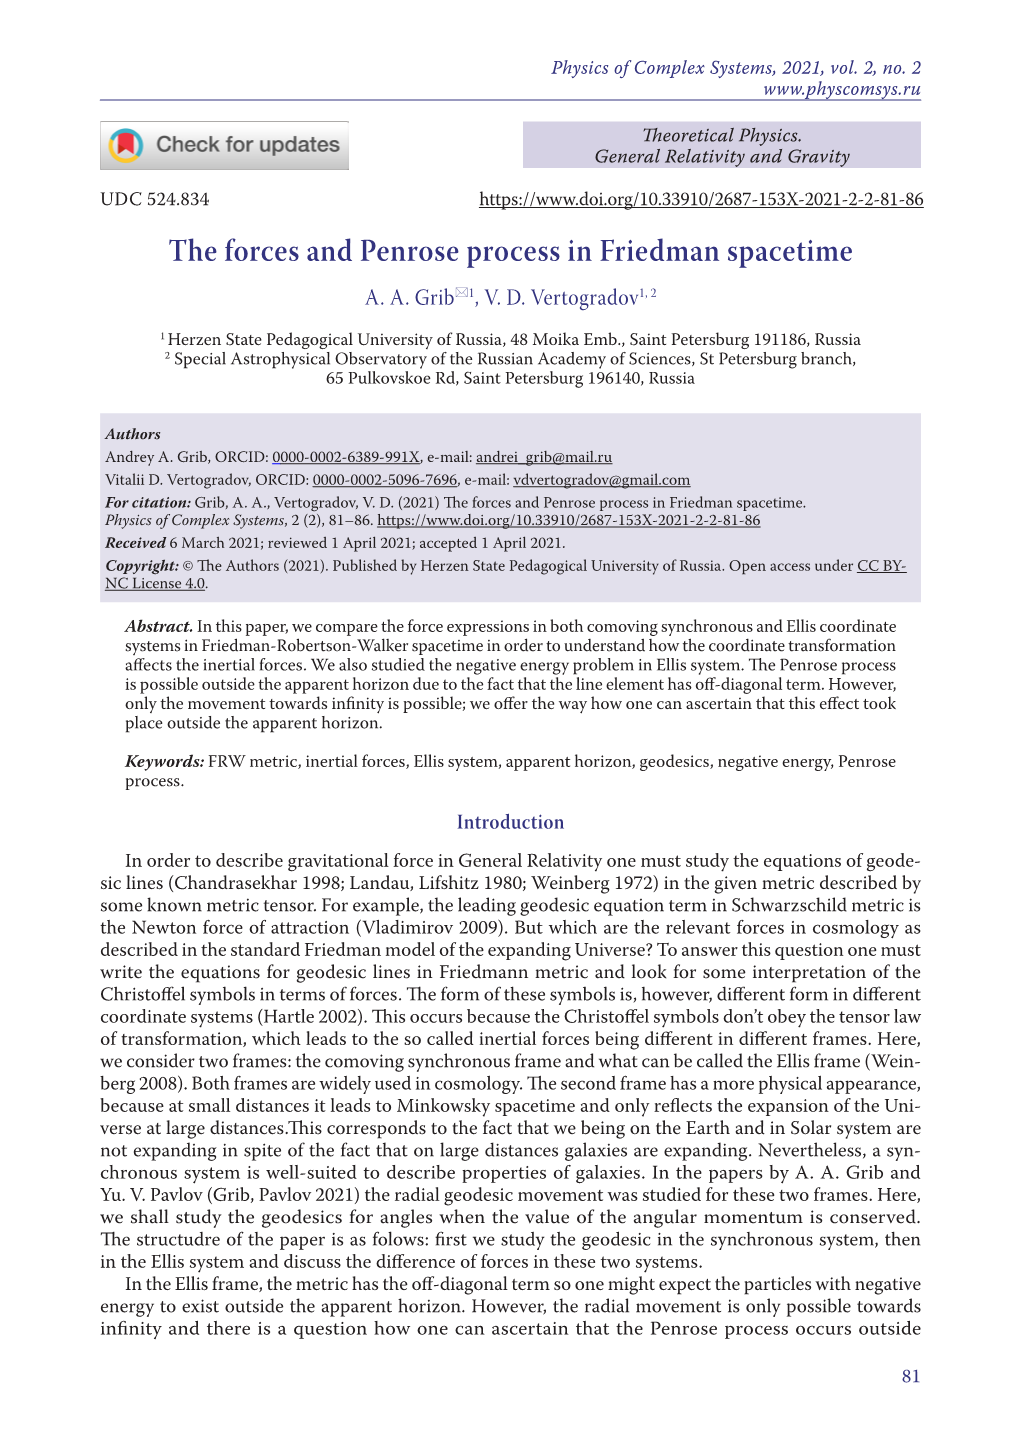 The Forces and Penrose Process in Friedman Spacetime A